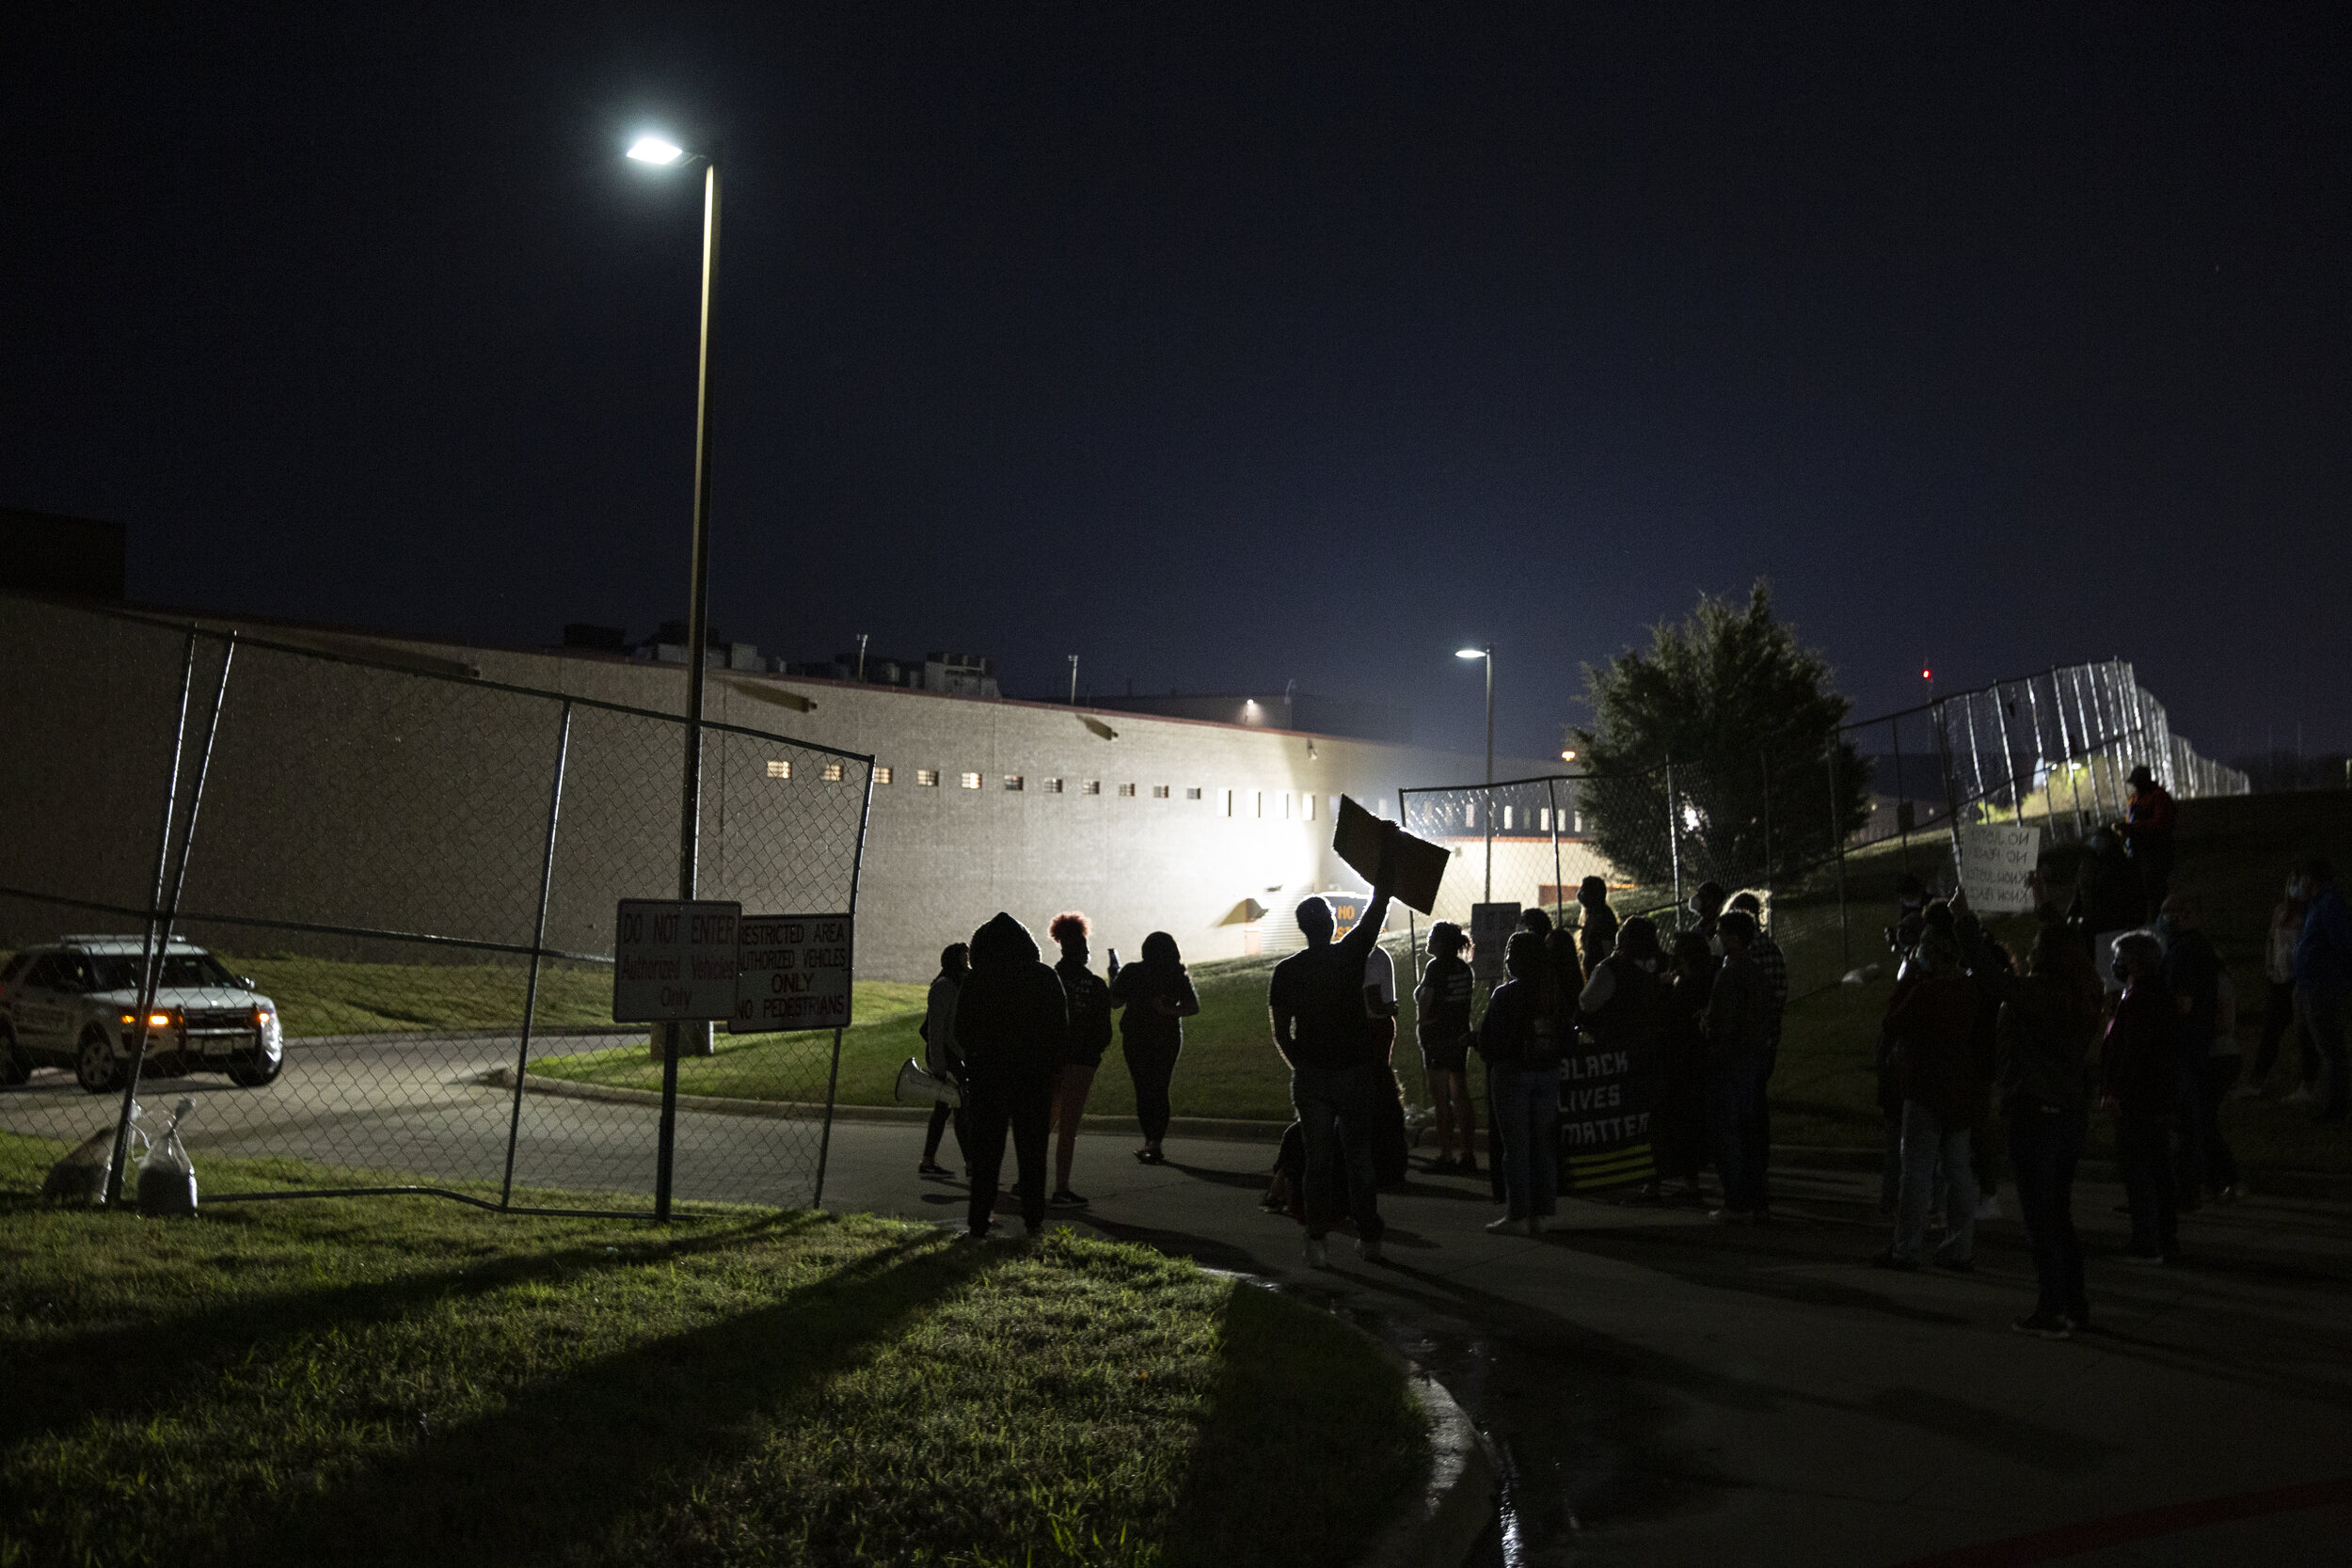  A fence was put up to block demonstrators from their original protest location, the inmate driveway, on March 26, 2021. The group still marched along the perimeter.   